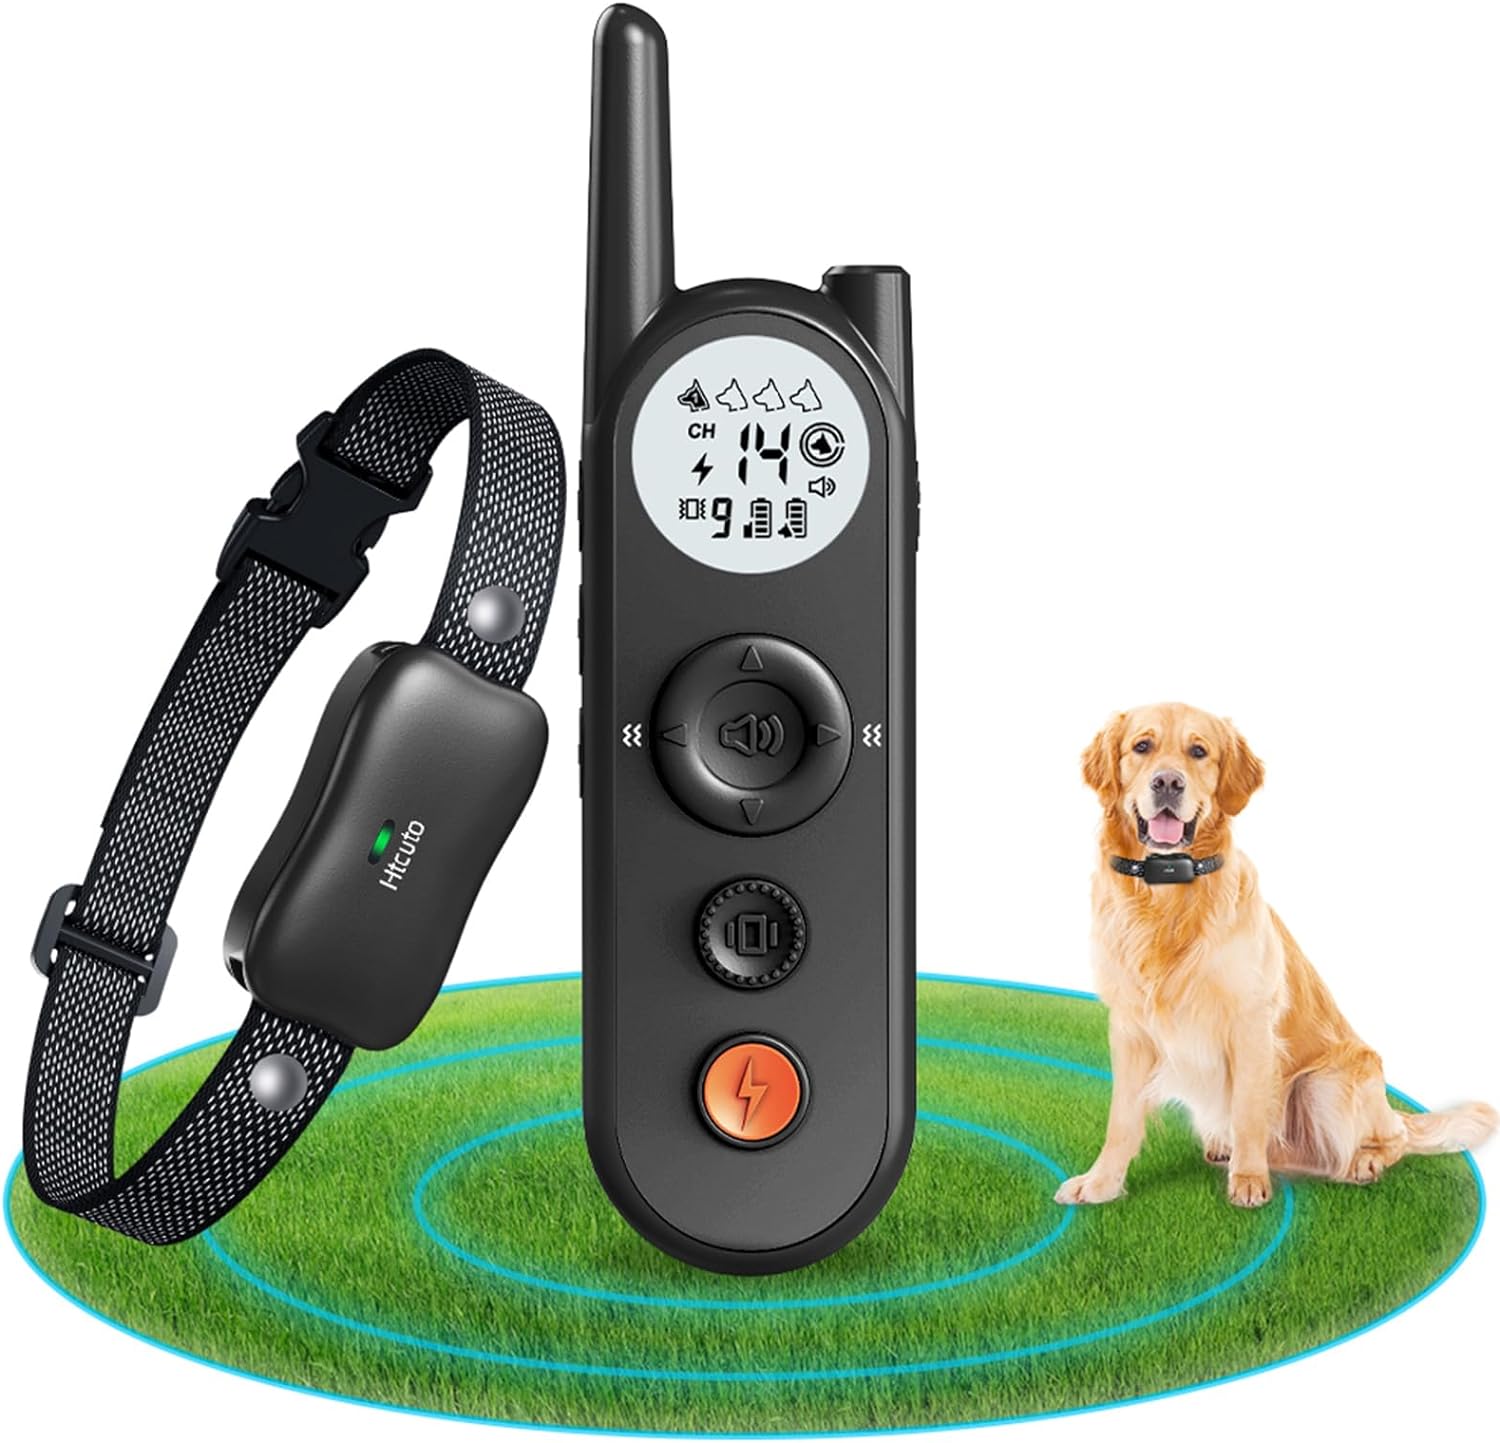 Wireless Dog Fence, 6100 FT Electric Dog Fence with Remote, 365 Days Battery Rechargeable Pet Containment System for Dogs with IPX7 Waterproof, Vibration/Beep/Shock Modes for All Breeds